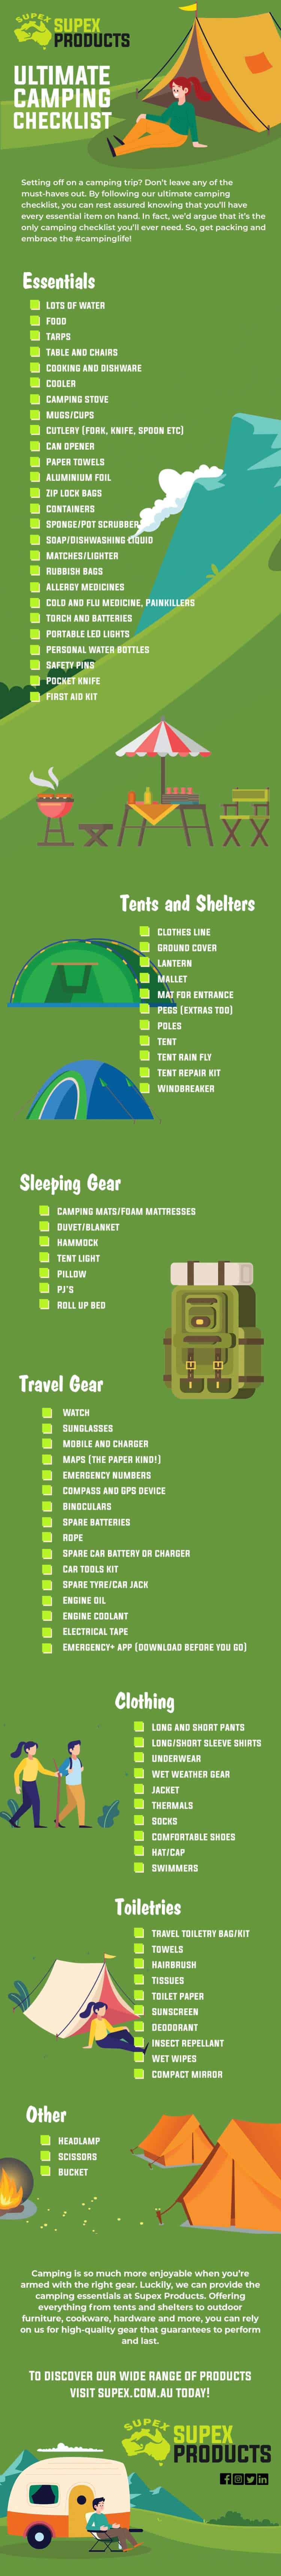 ultimate-camping-list-infographic